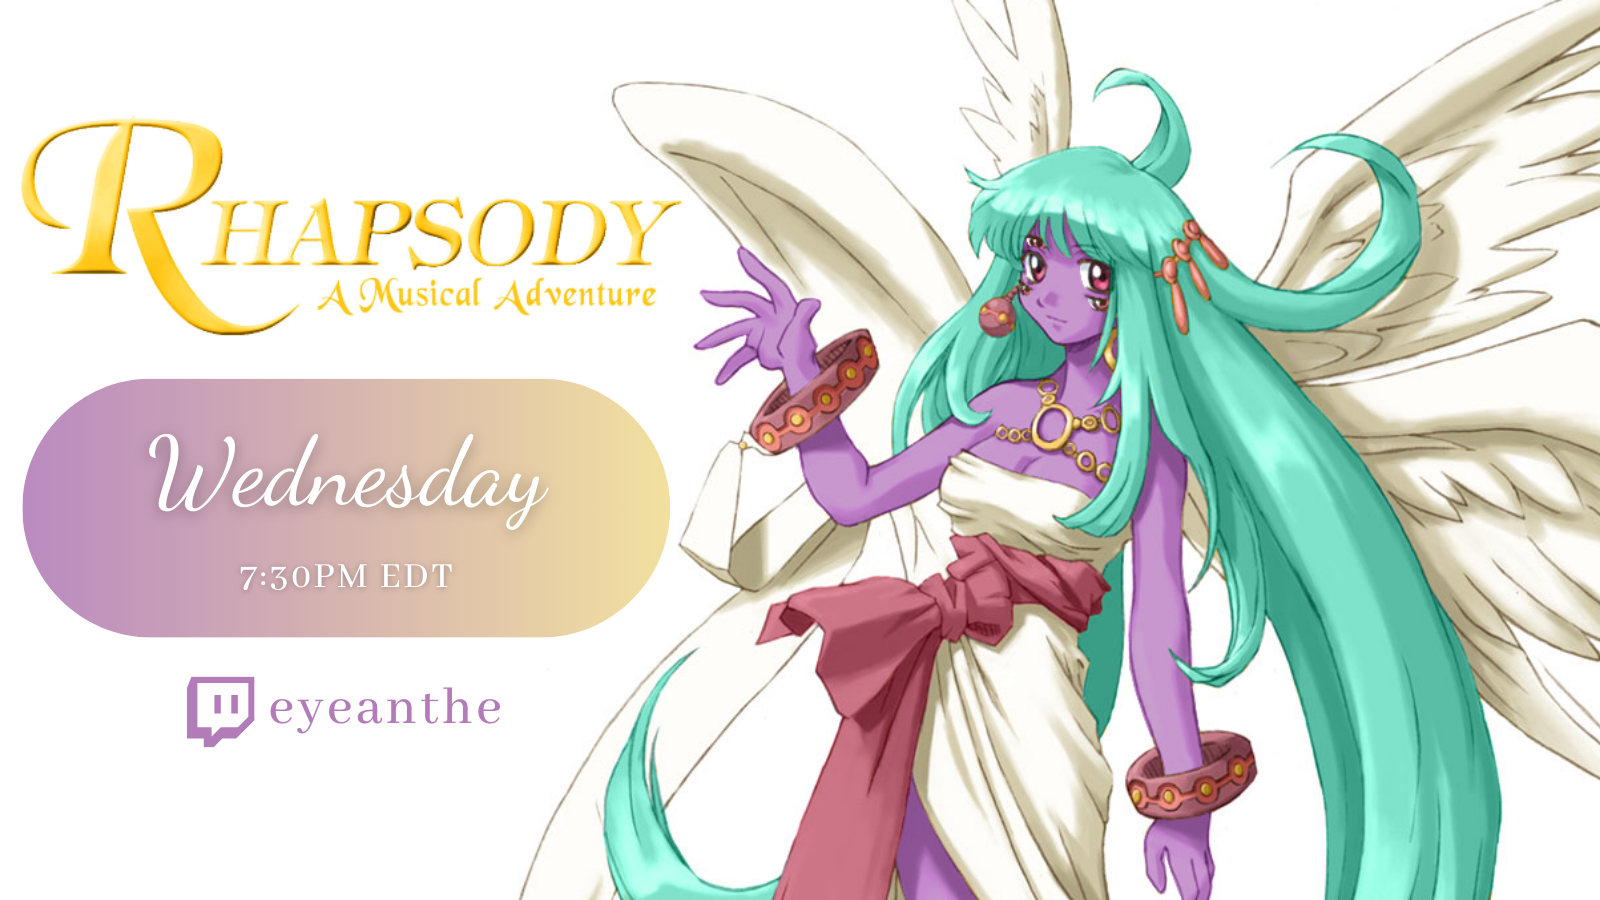 Promotional image for Rhapsody: A Musical Adventure with the
                                                mysterious cover character edited to look like Ianthe.